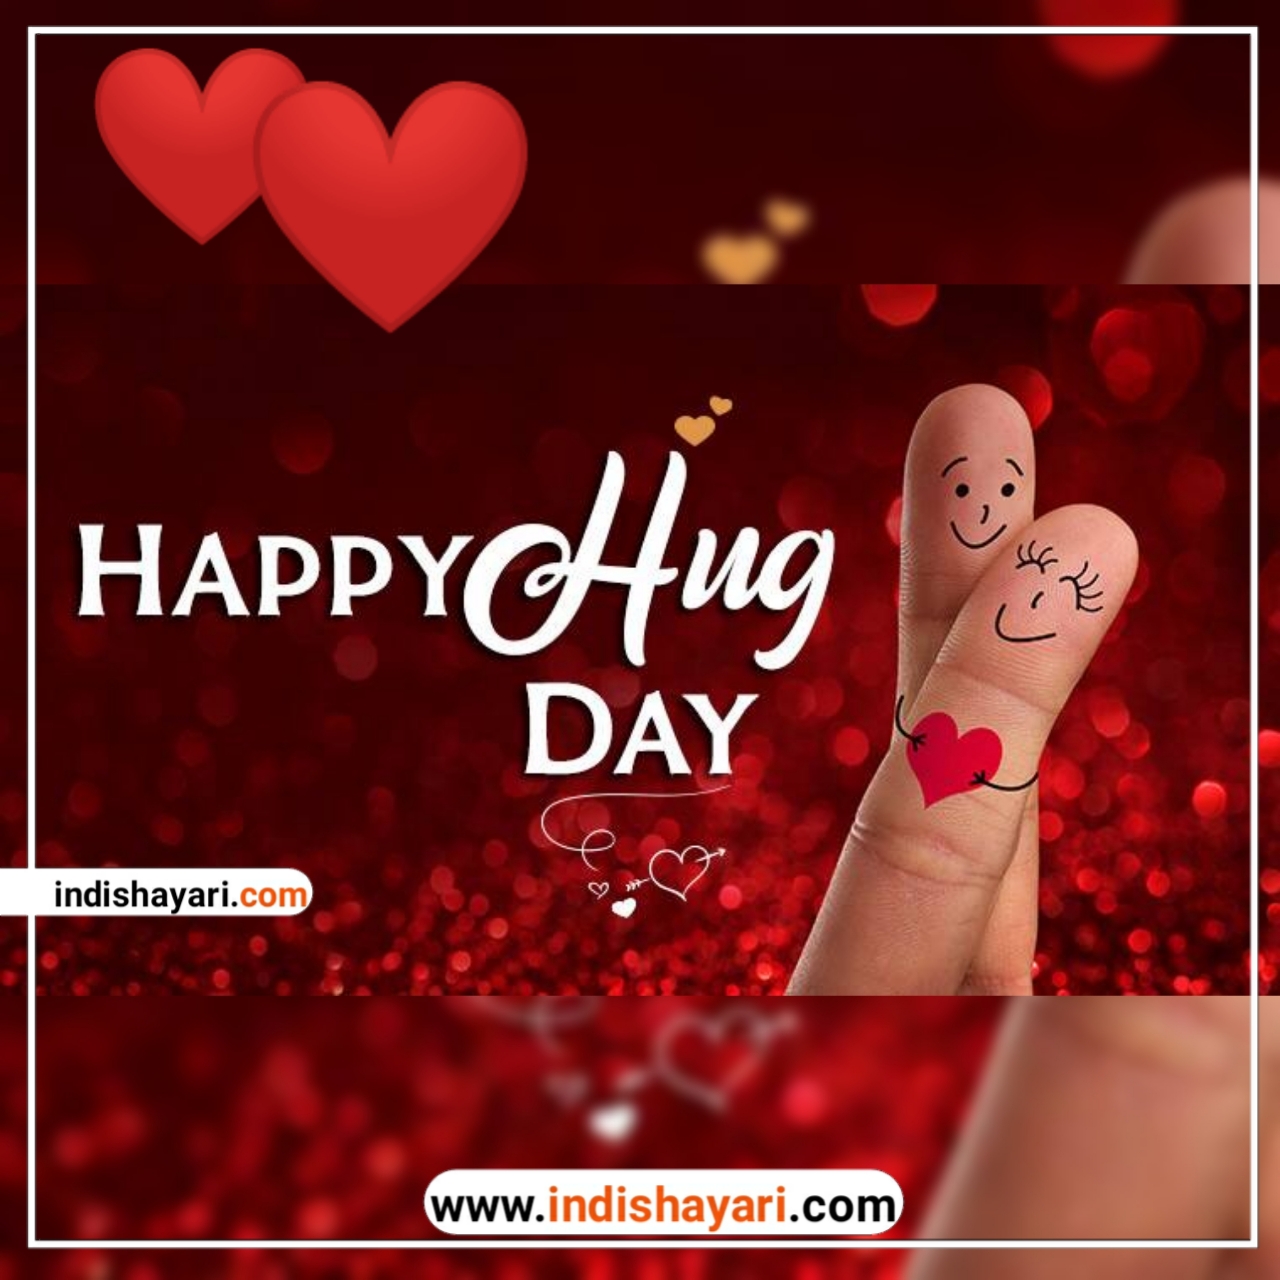 Happy Hug Day Quotes whishes greetings sms  images for whatsapp Facebook Instagram status